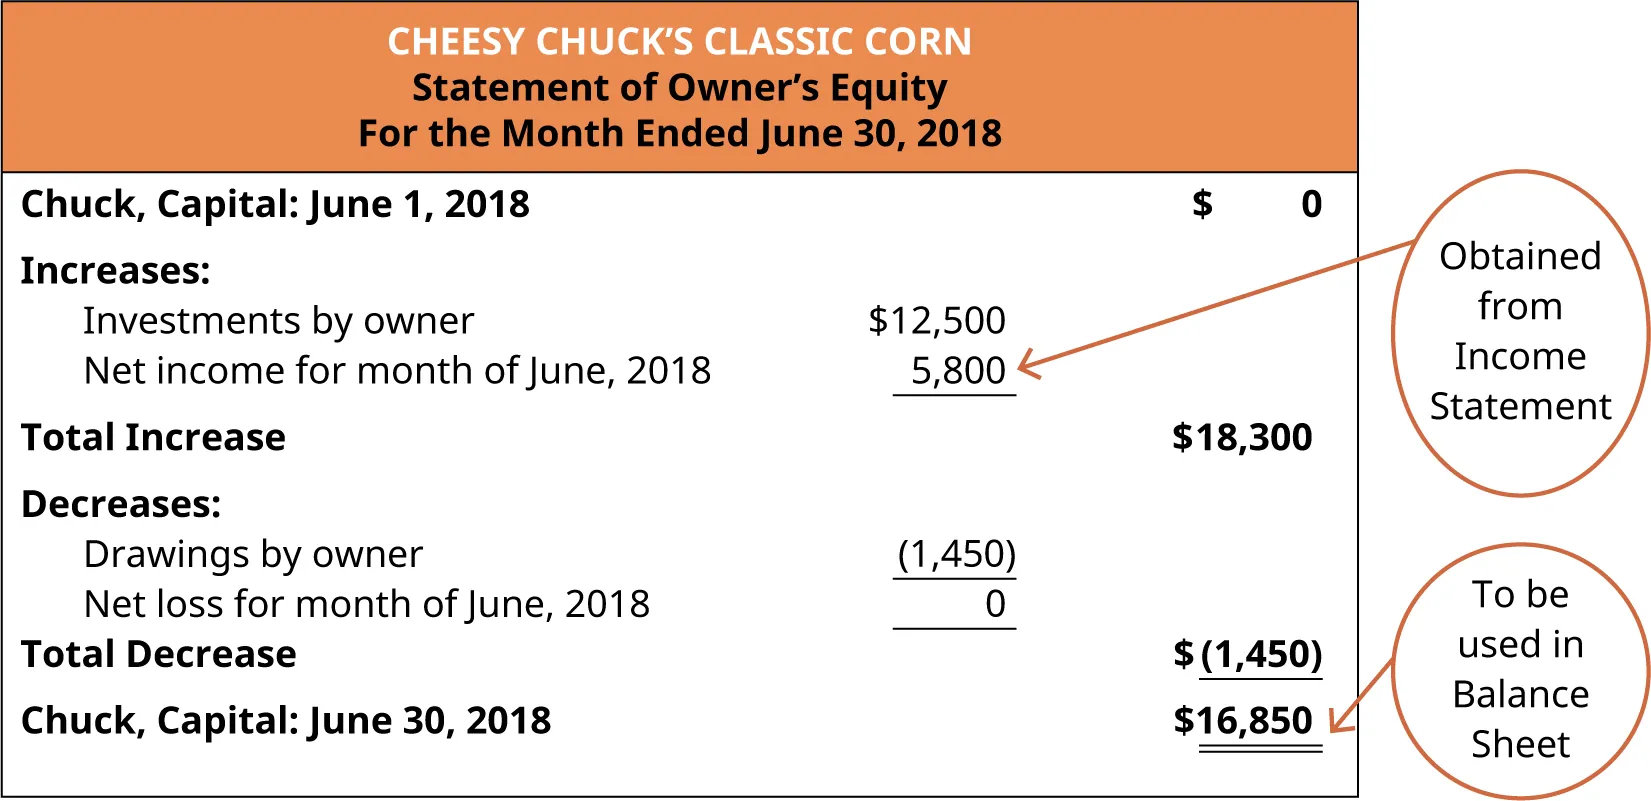 Cheesy Chuck’s Classic Corn, Statement of Owner’s Equity, For the month Ended June 30, 2018. Chuck, Capital: June 1, 2018 $0; Increases: Investments by owner $12,500, Net income for the month of june, 2018 [obtained from the income statement] 5,800. Total Increase 18,300. Decreases: Drawings by owner (1,450). Total Decrease (1,450); Chuck, Capital: June 30, 2018 $16,850 [To be used in Balance Sheet]